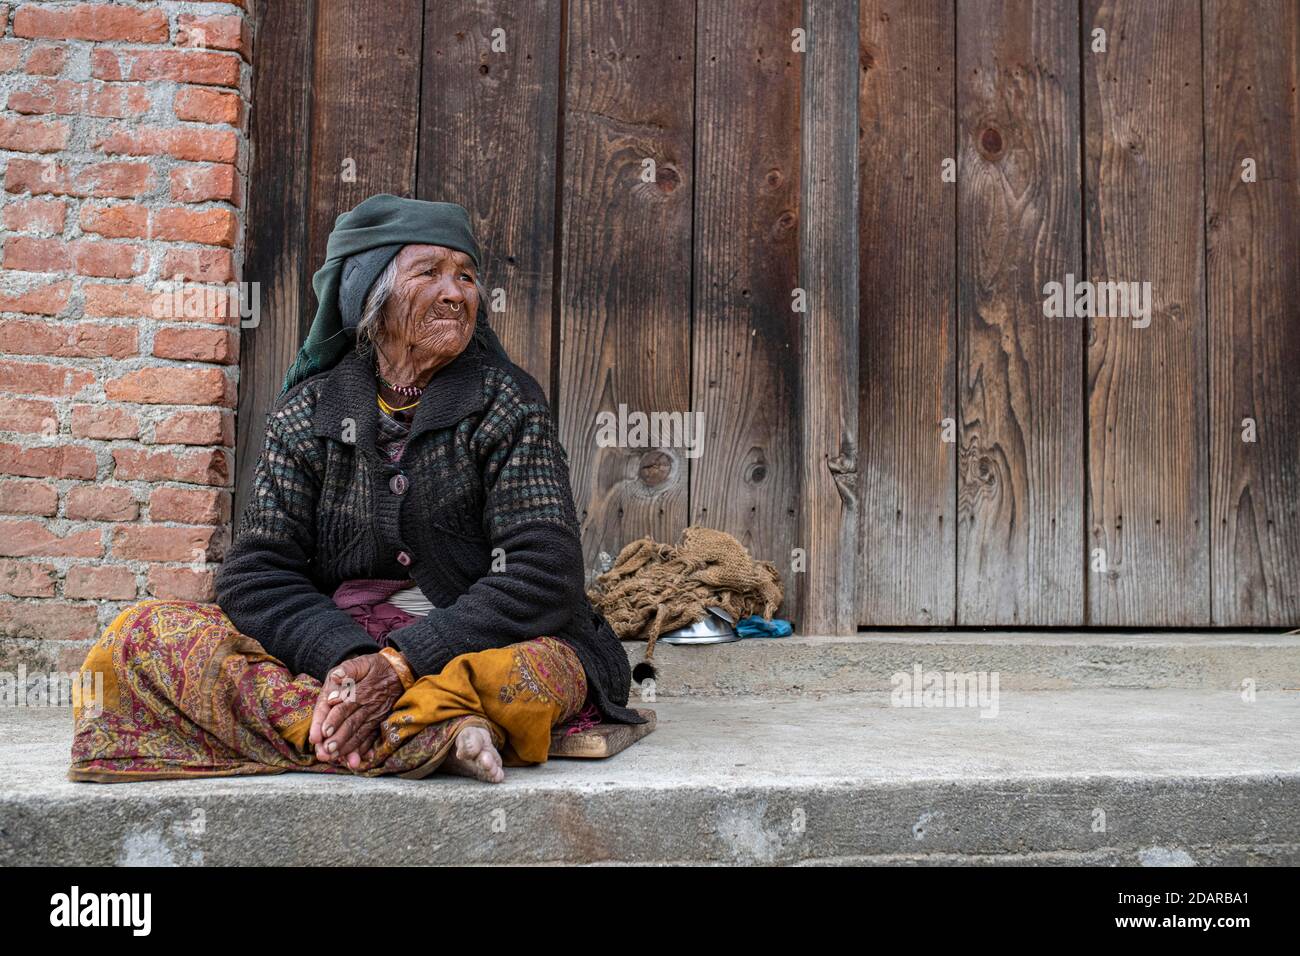 Elderly woman with headscarf and nose ring sitting in front of a wooden  door, Himalaya, Jiri, Khumbu region, Nepal Stock Photo - Alamy